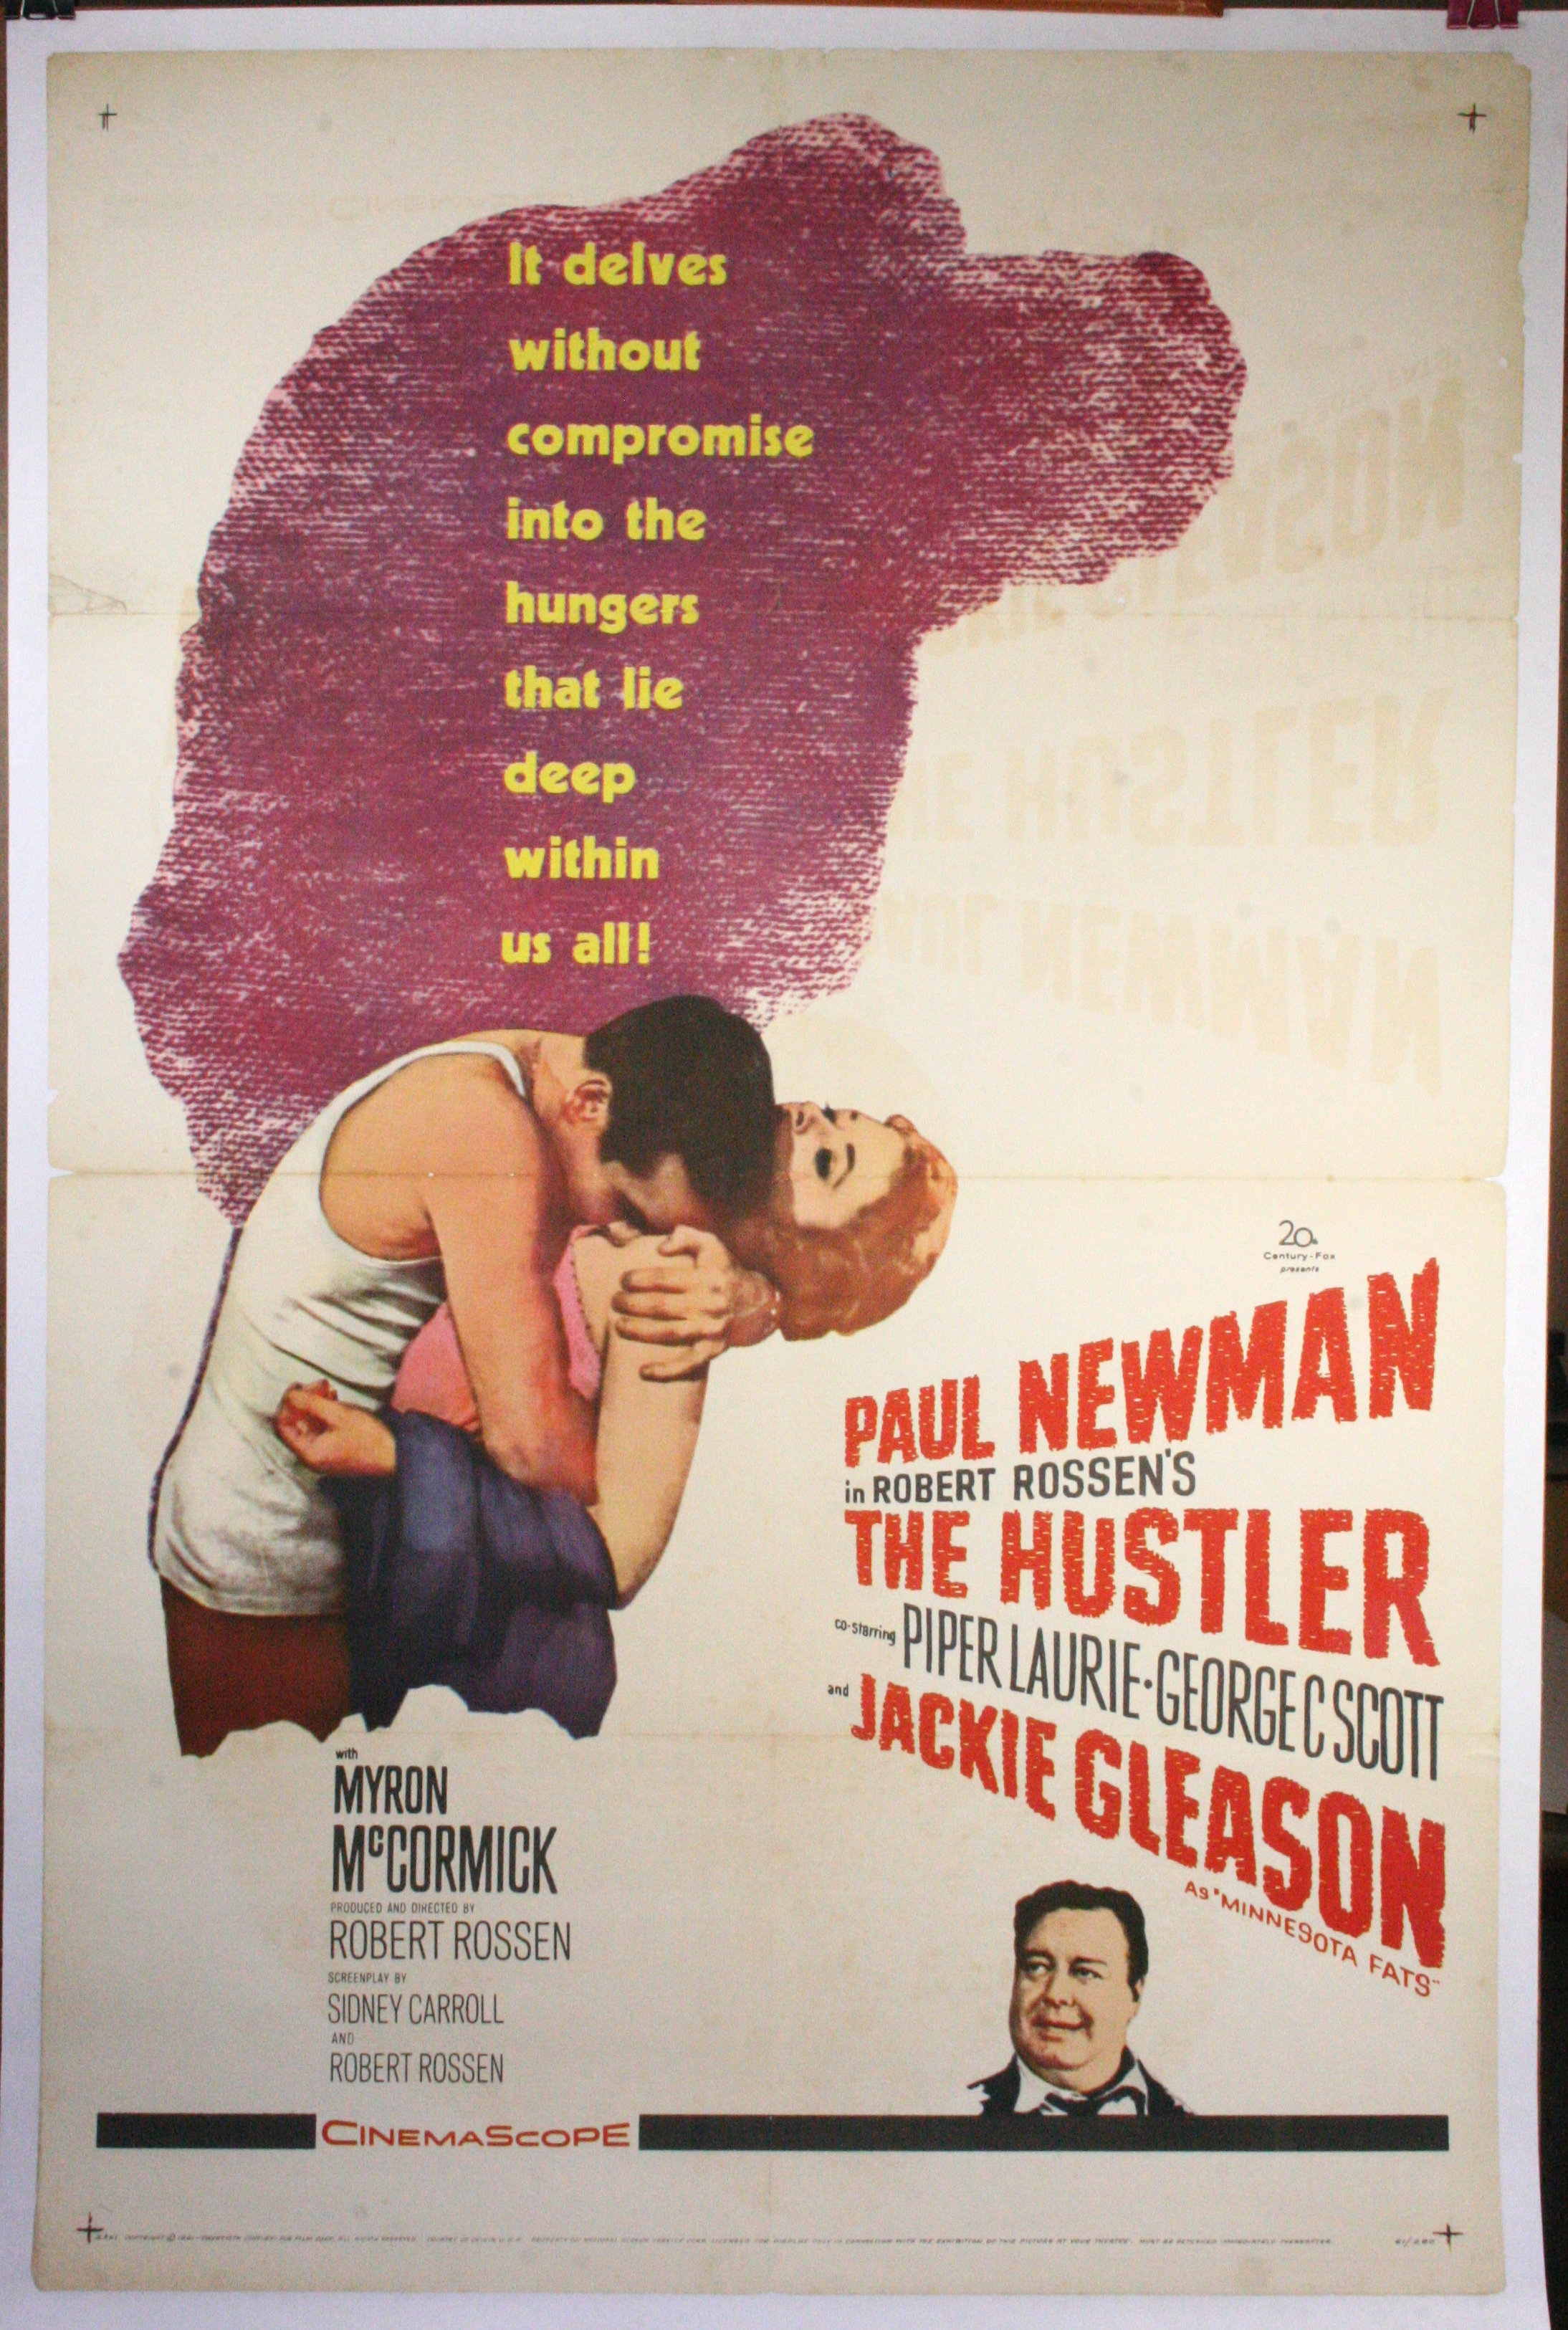 The Compromise [1968]